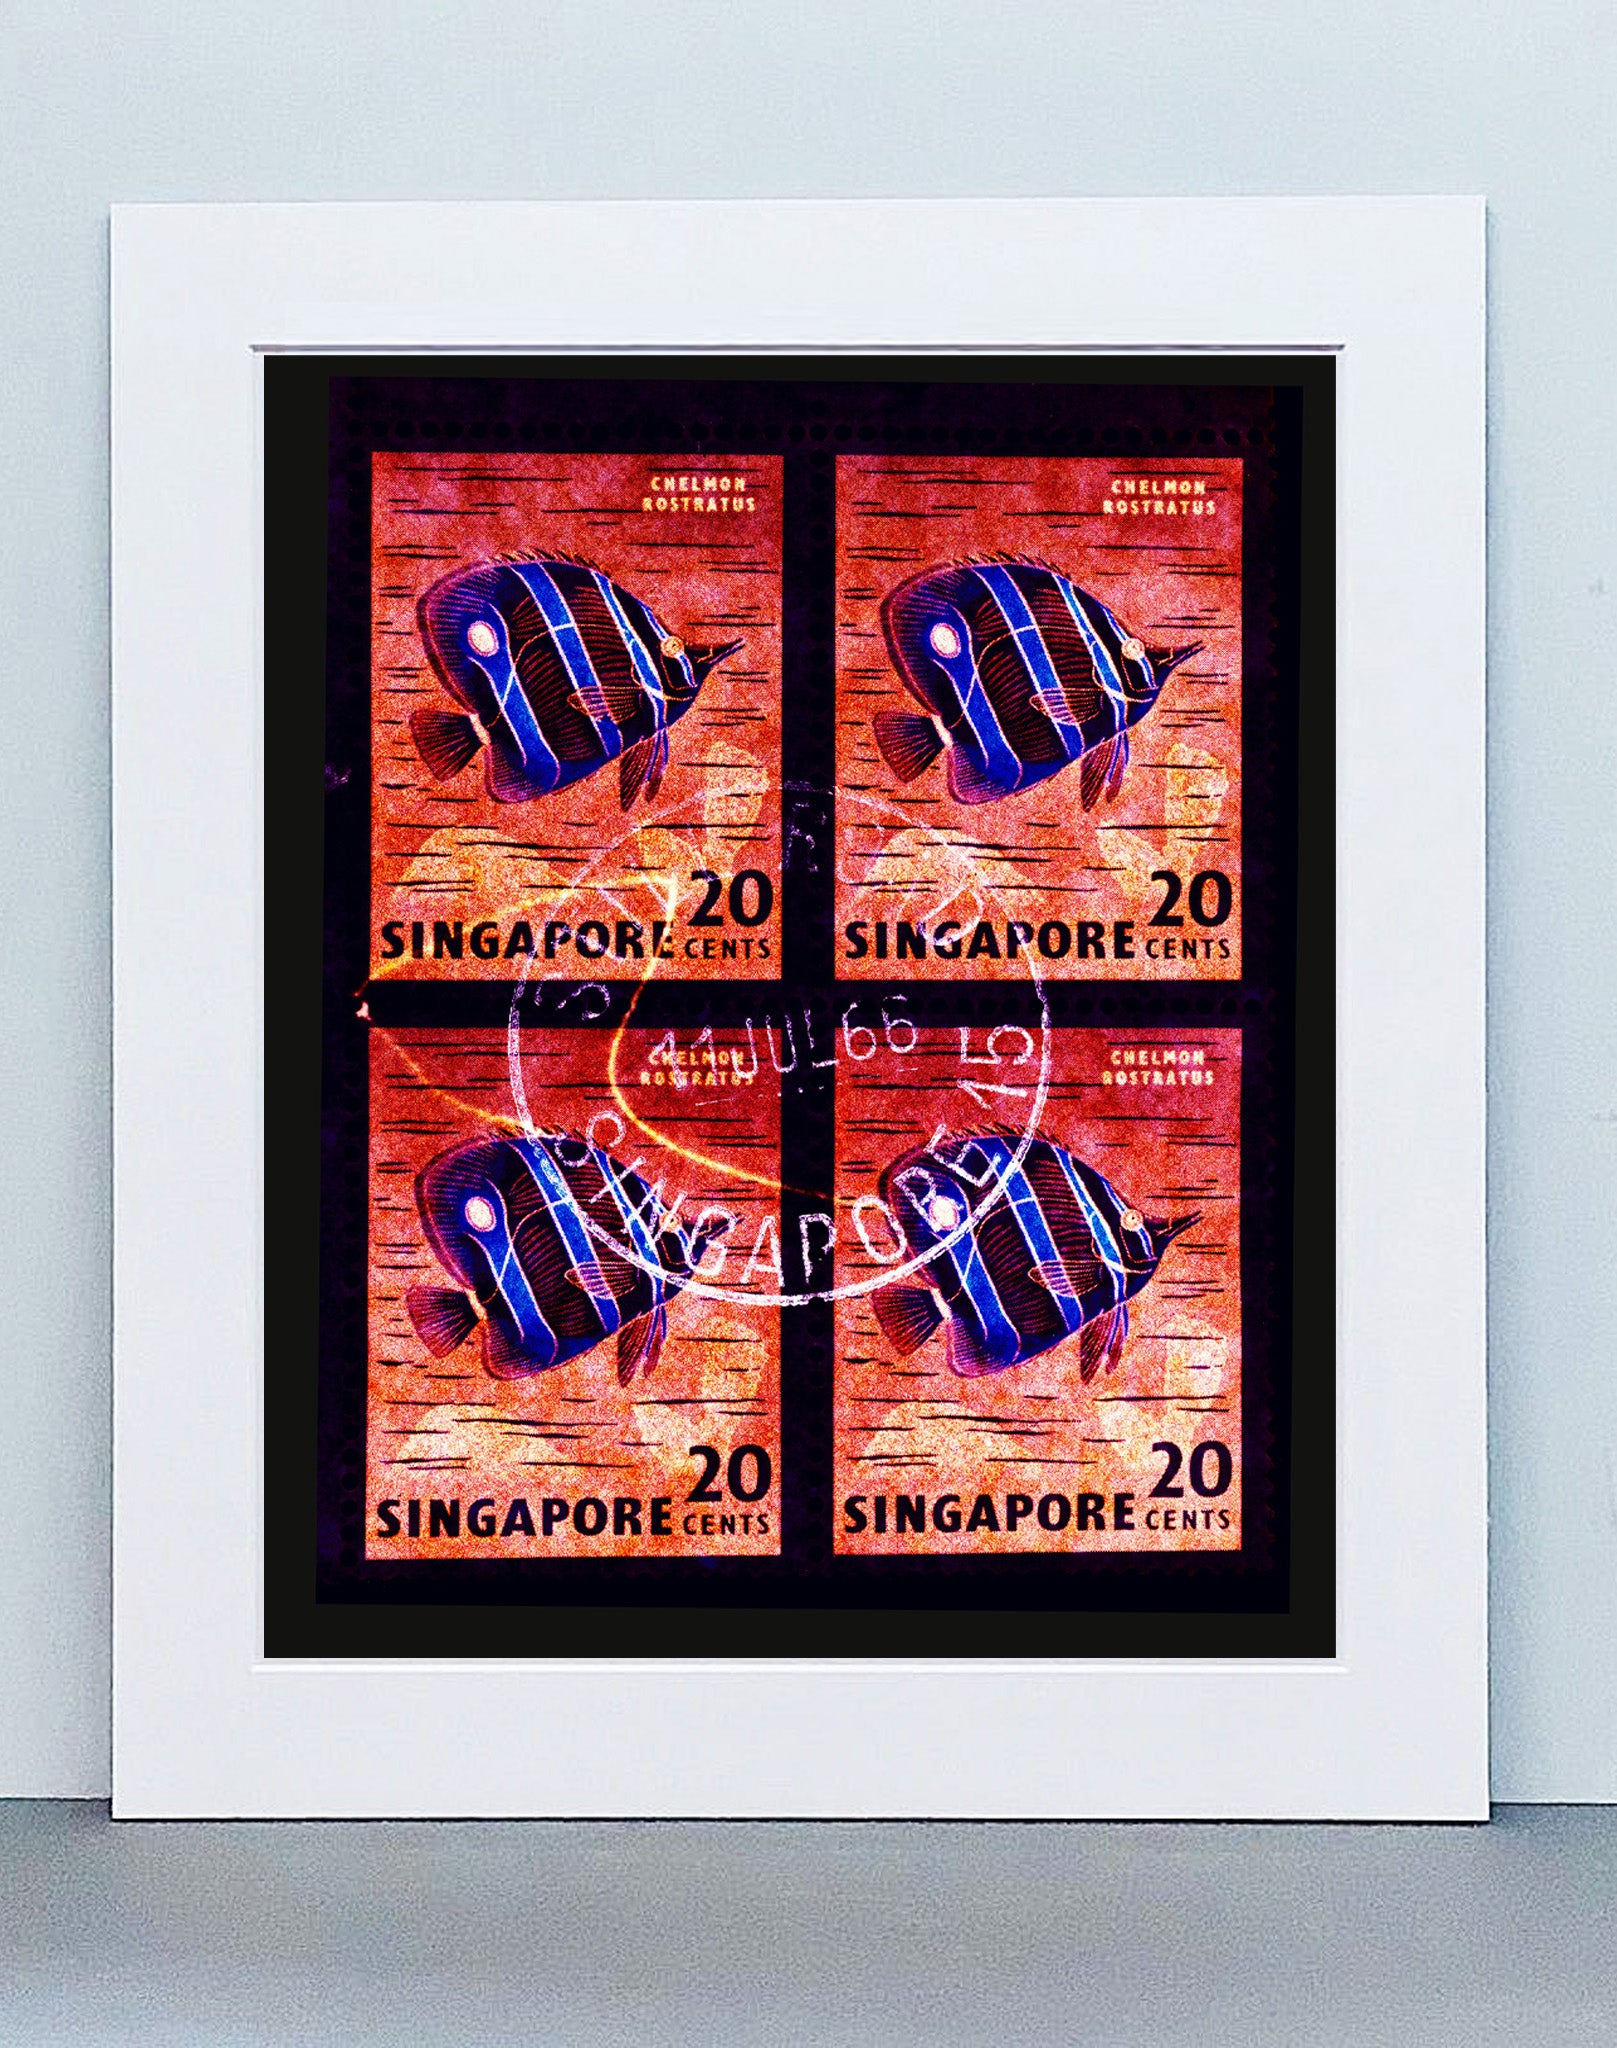 20 Cents Singapore Butterfly Fish from Heidler & Heeps Stamp Collection, Singapore Series "Postcards from Afar". The fine detailed tapestry of the original small postage stamp has been brought to life, made unique by the franking stamp and Heidler & Heeps specialist darkroom process. 